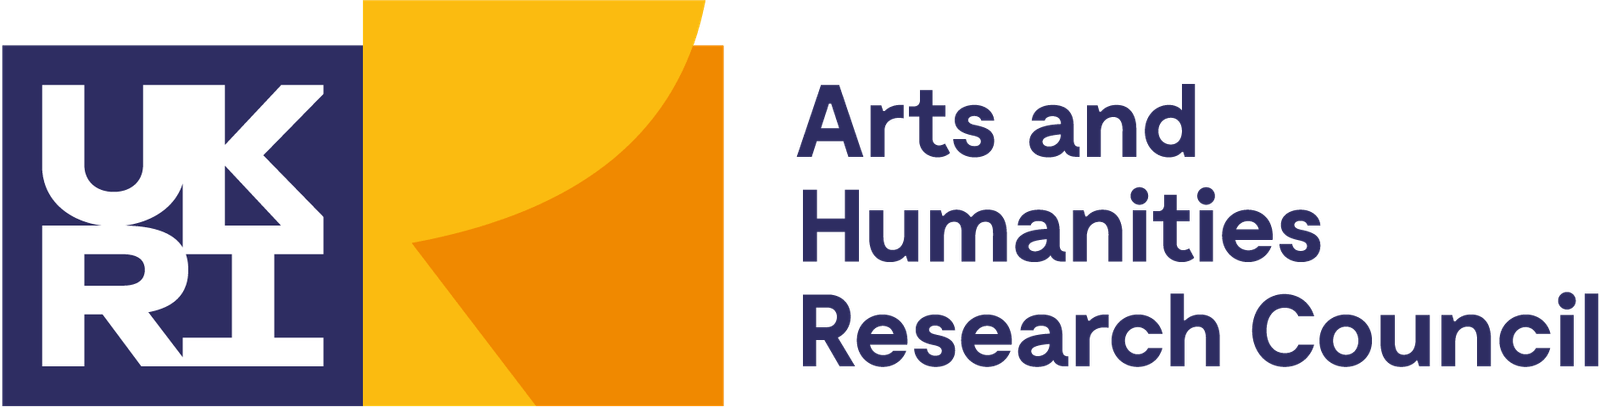 Arts and Humanities Research Council (AHRC)